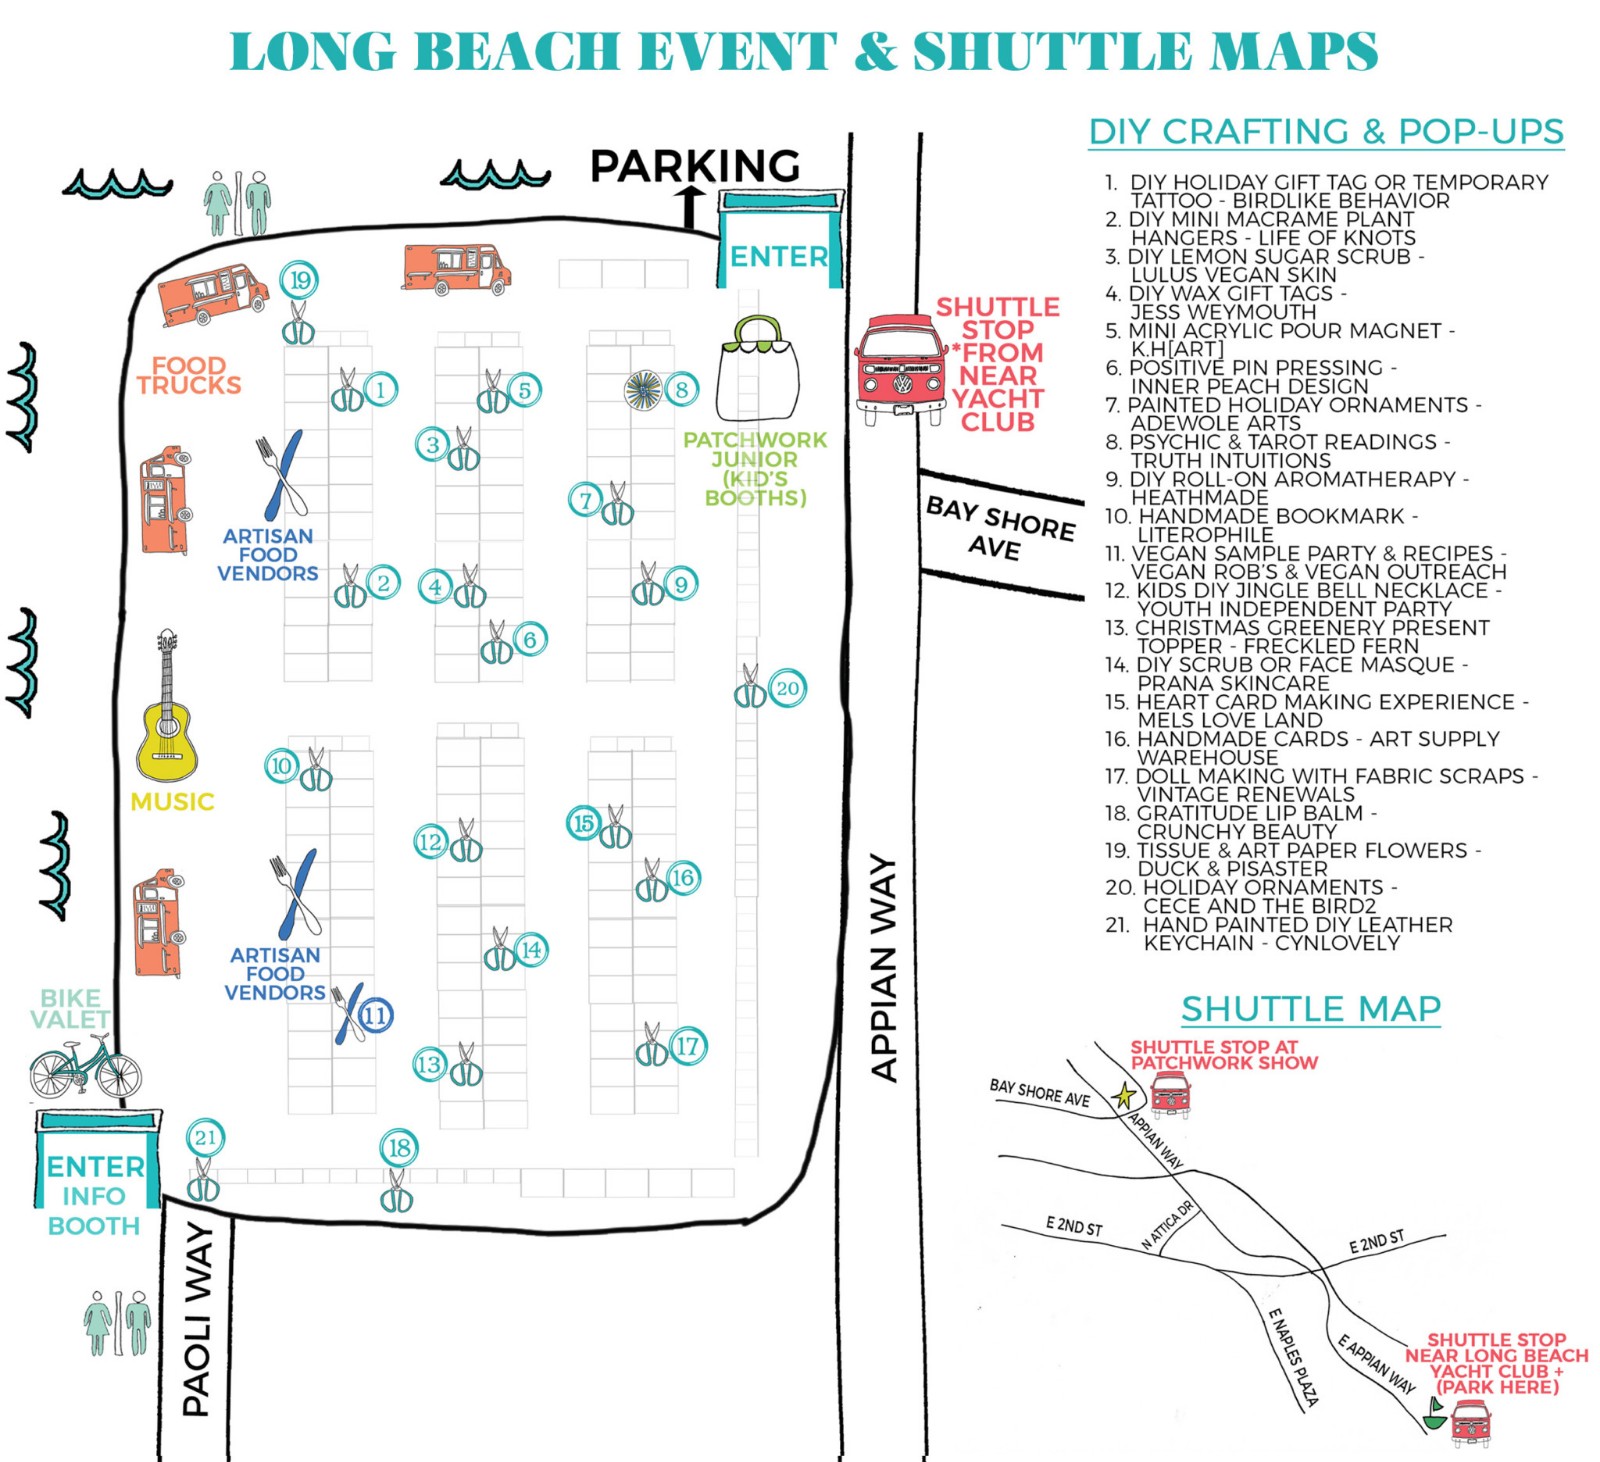 NEW-pw-lb-event-shuttle-maps-for-web.jpg